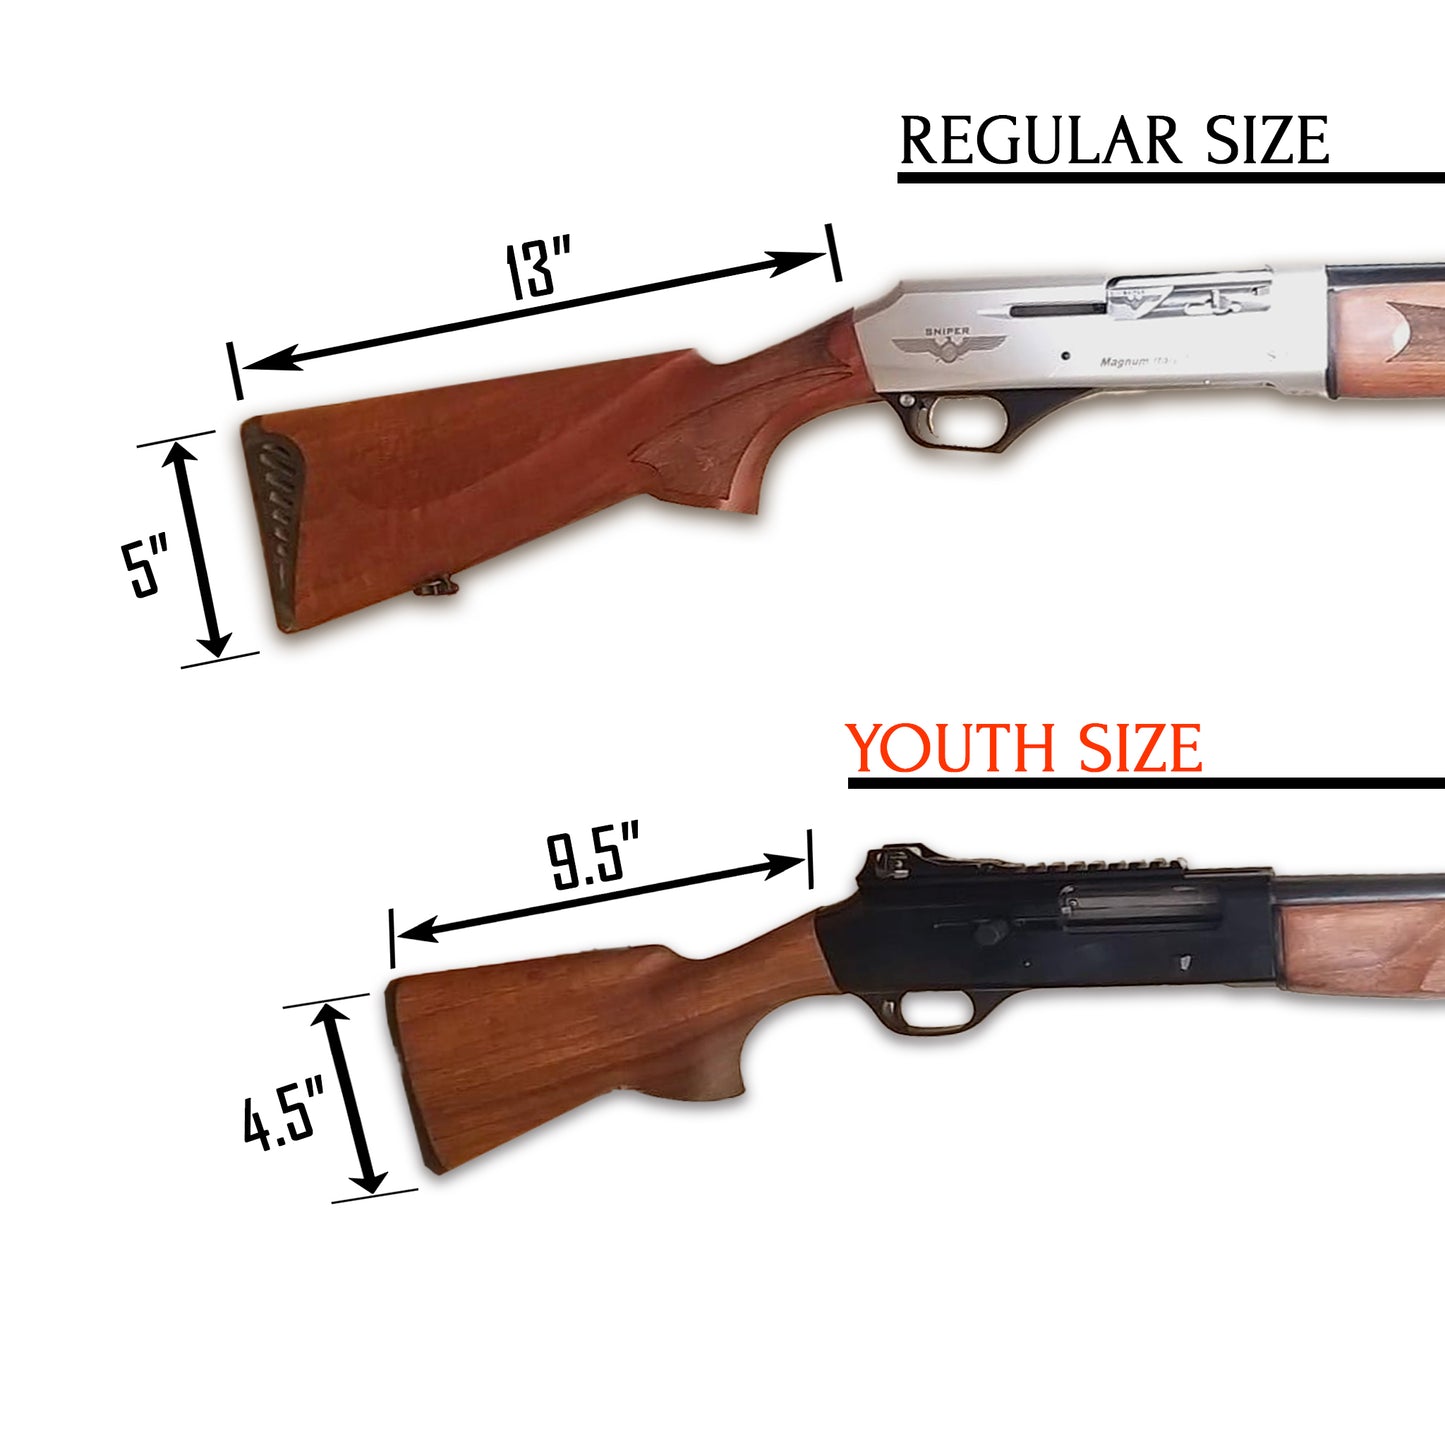 Emperor Arms Royal Crown 20 GA Turkish Walnut Youth Stock: Compact Elegance for Junior Shooters - 9.5" x 4.5"